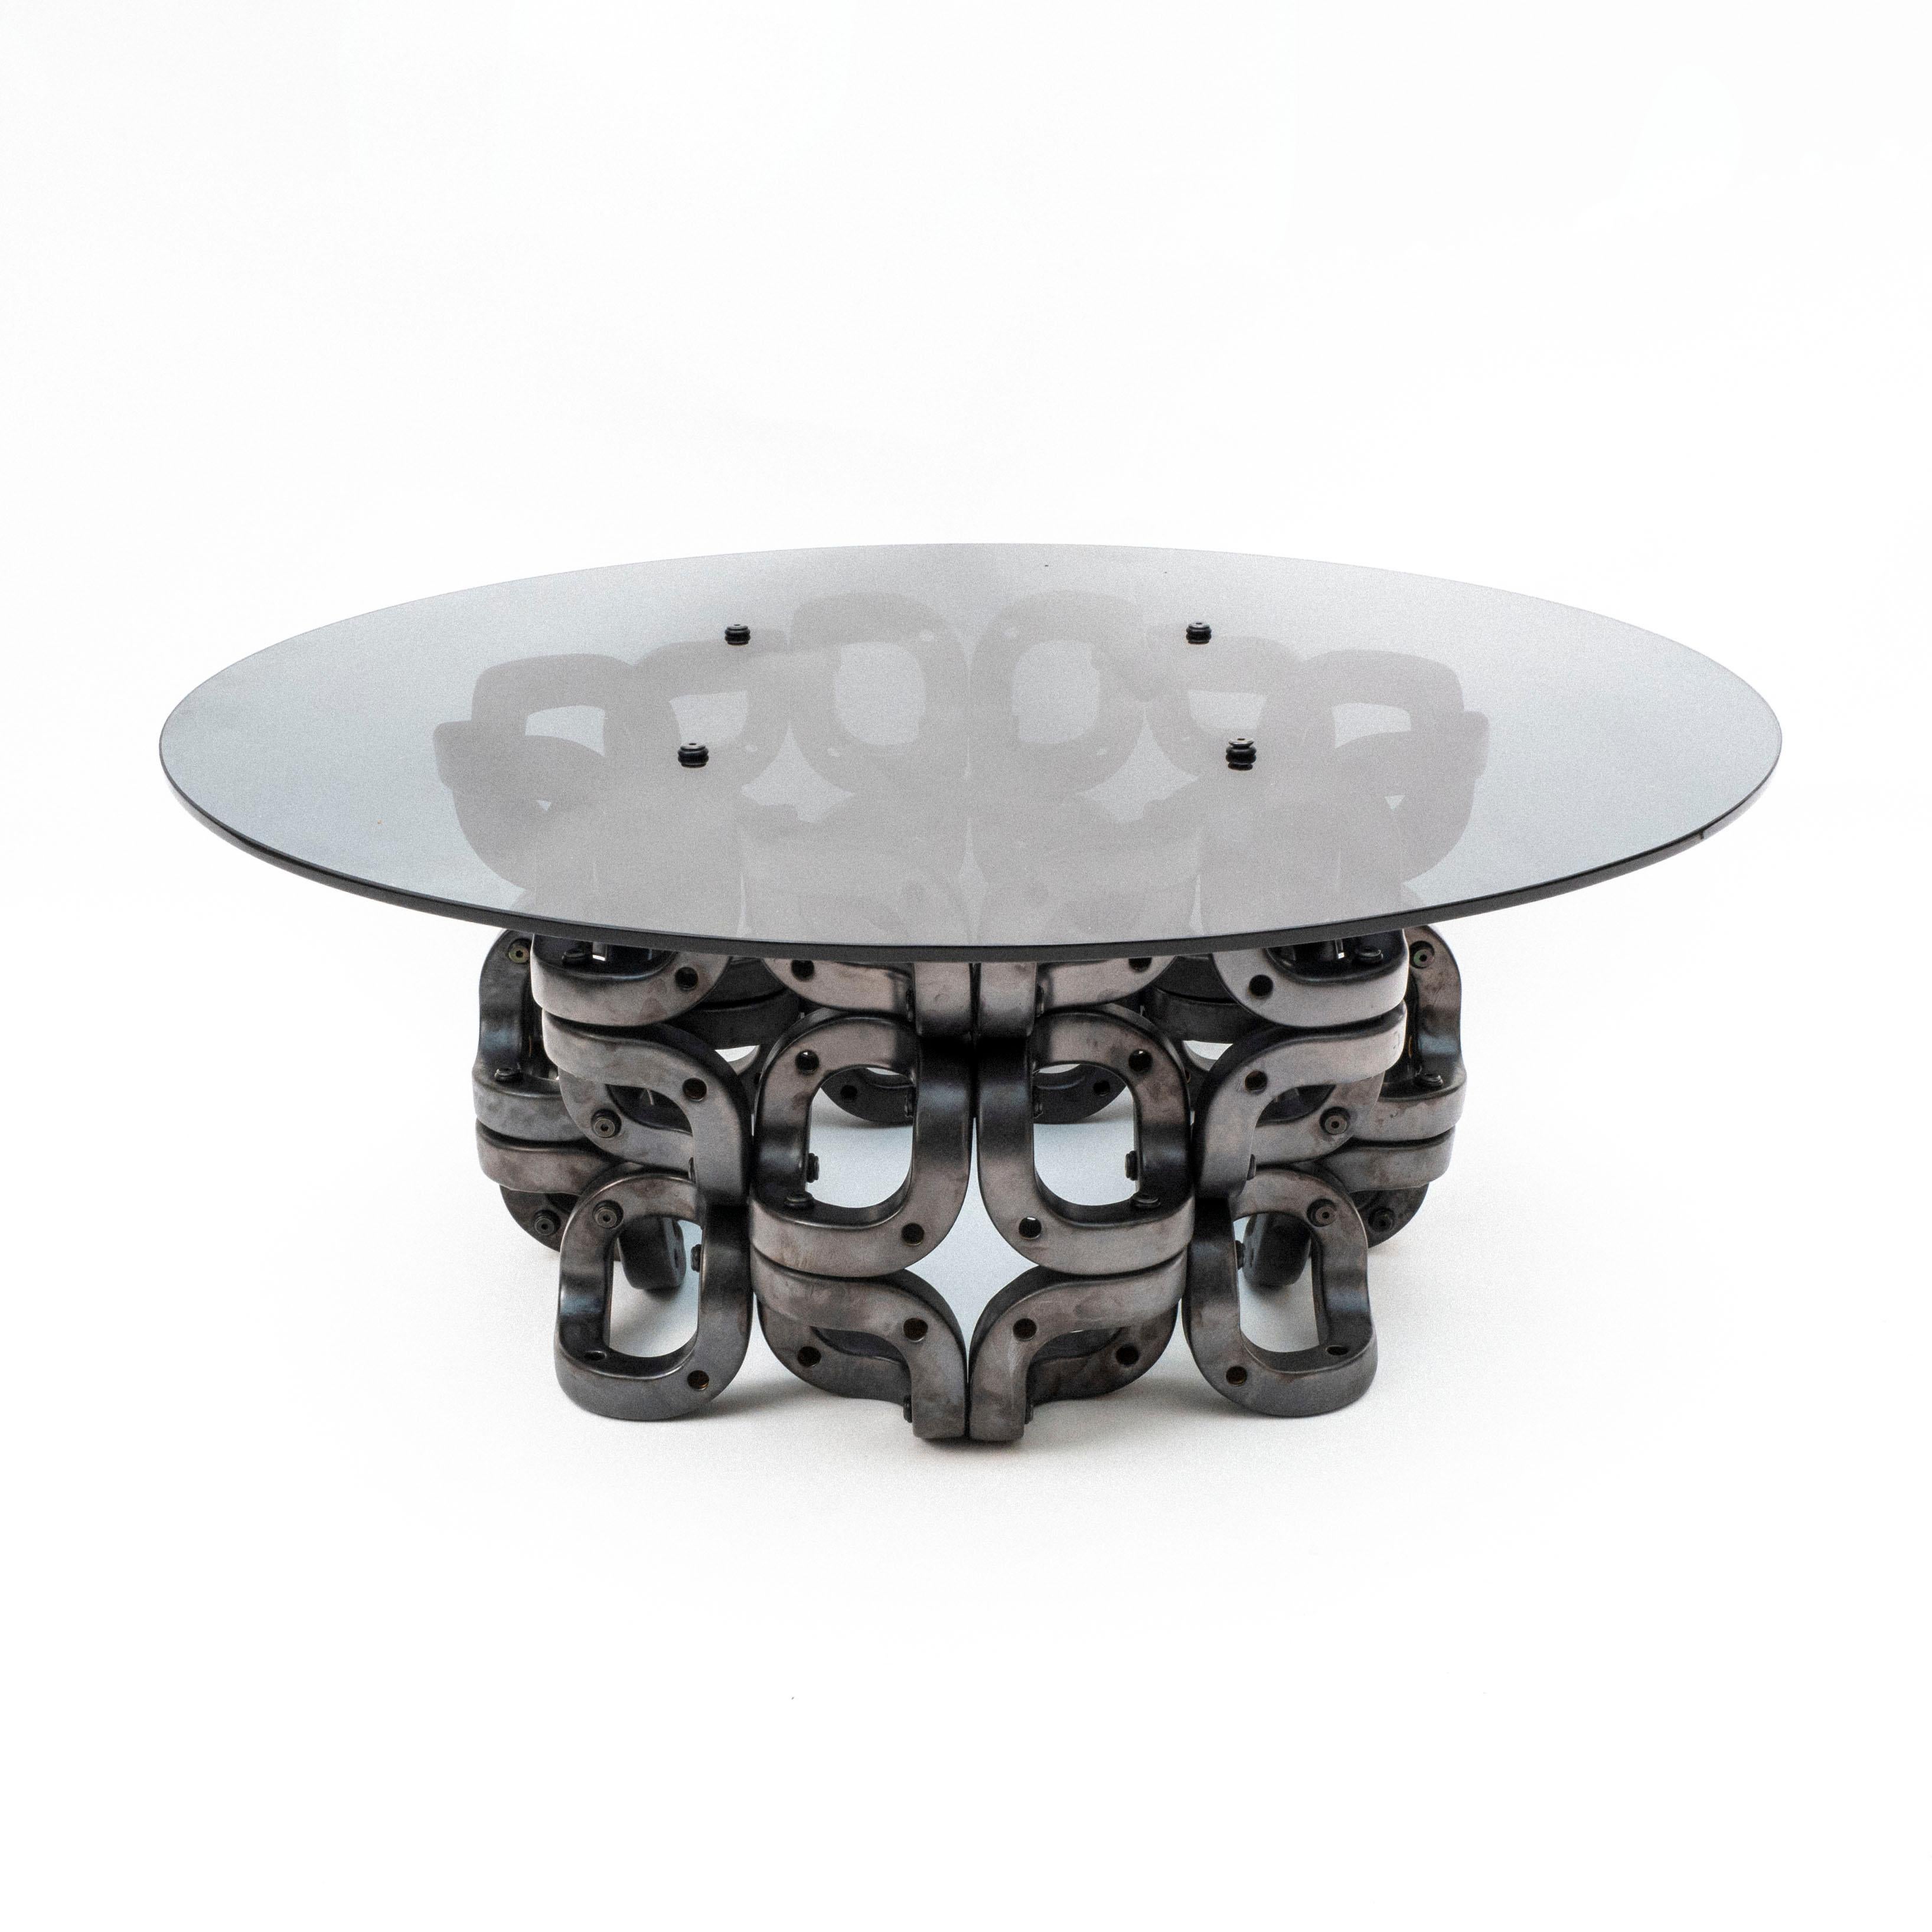 Laila; Modular Geometric Contemporary Ceramic and Glass Table by Pedro Cerisola For Sale 1